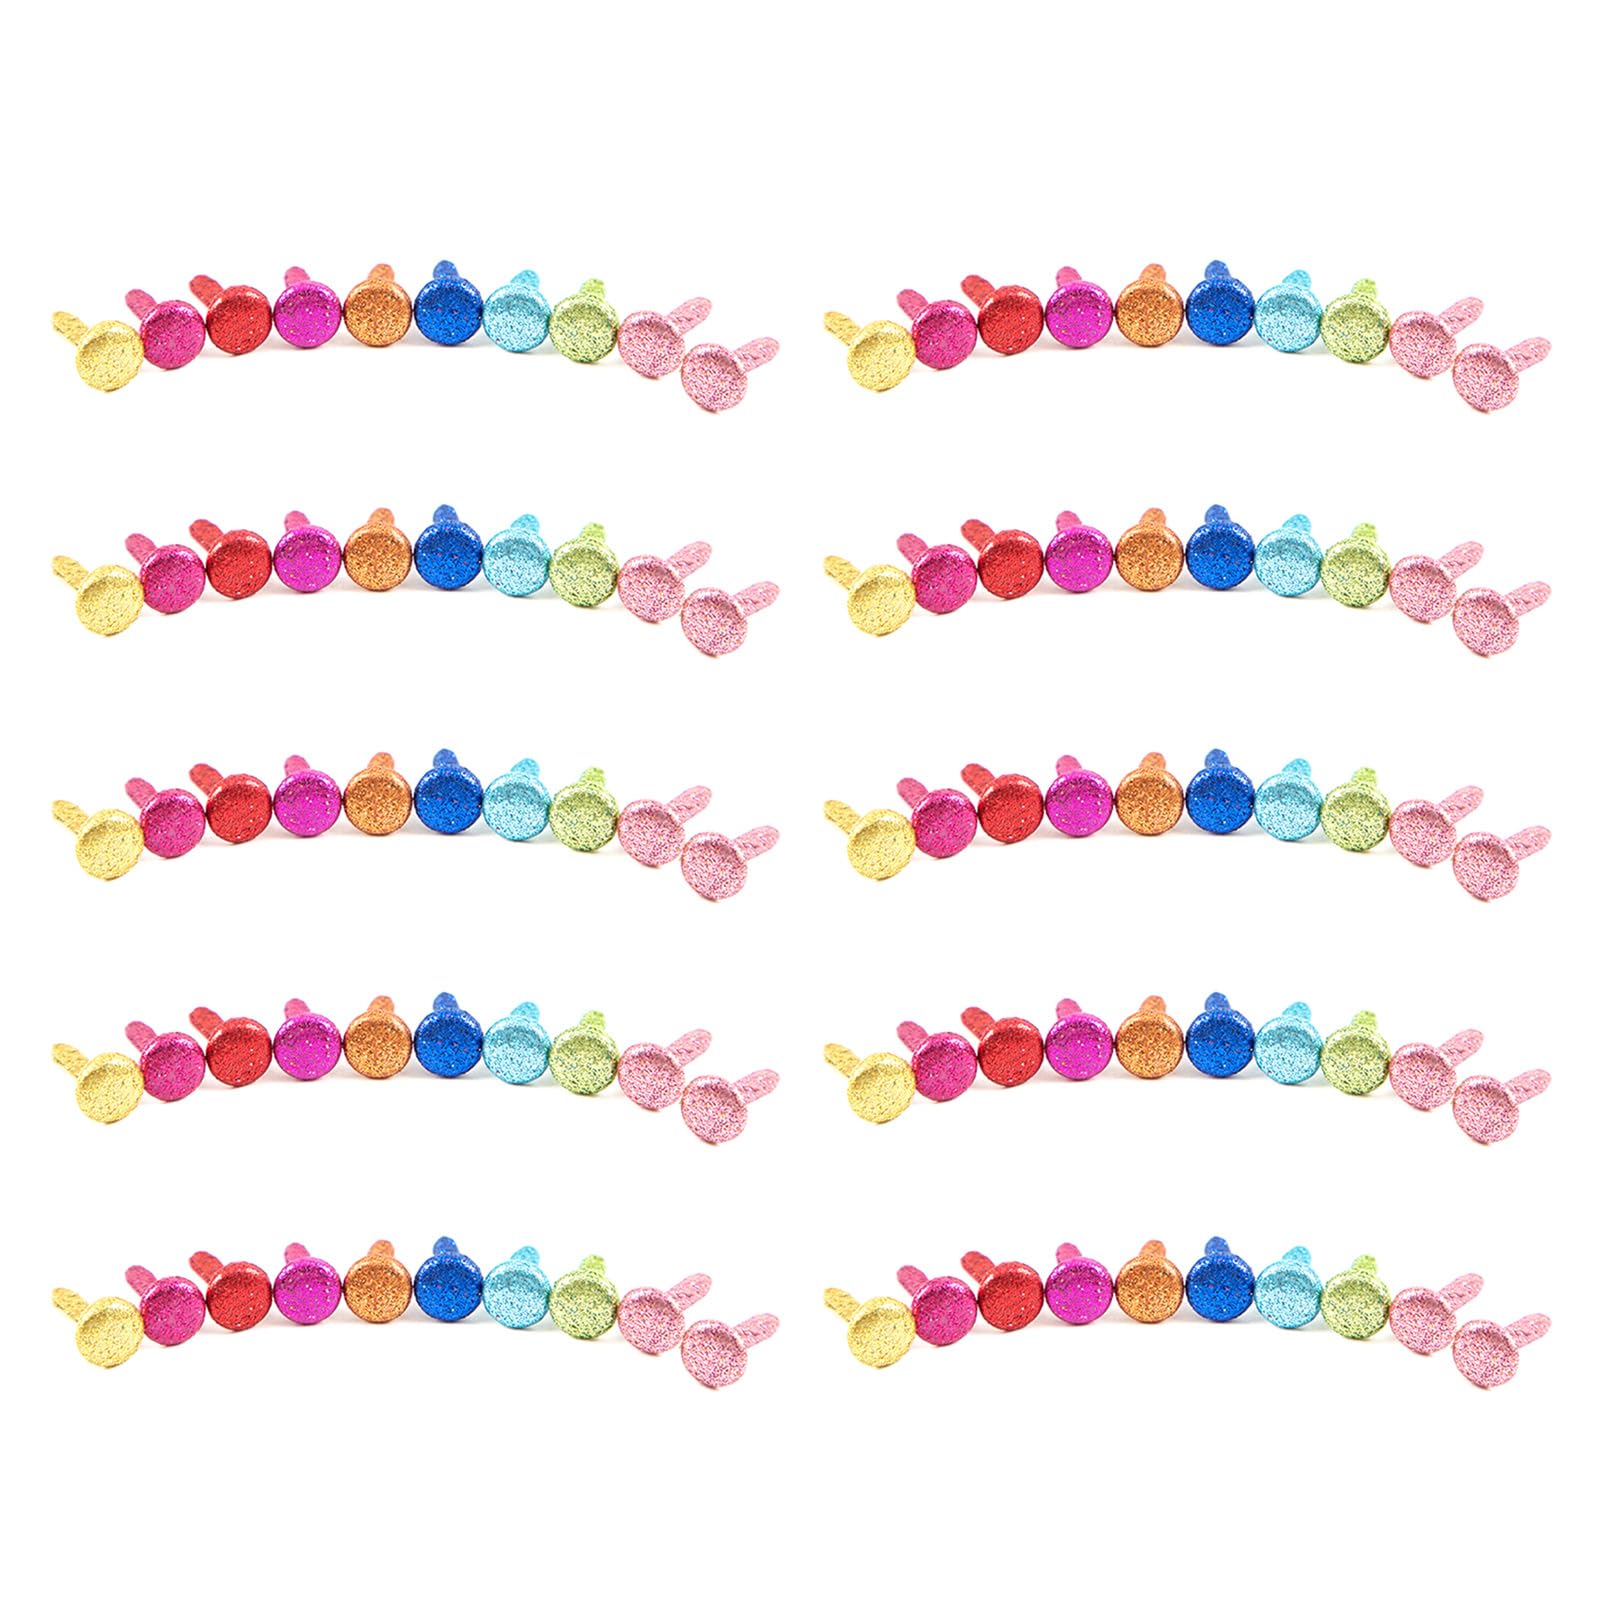 Pack Of 100 Mini Round Brads Metal Clips Paper Clasps Split Pins Crafting Essential For Scrapbooking DIY Crafts Durable Mini Brads